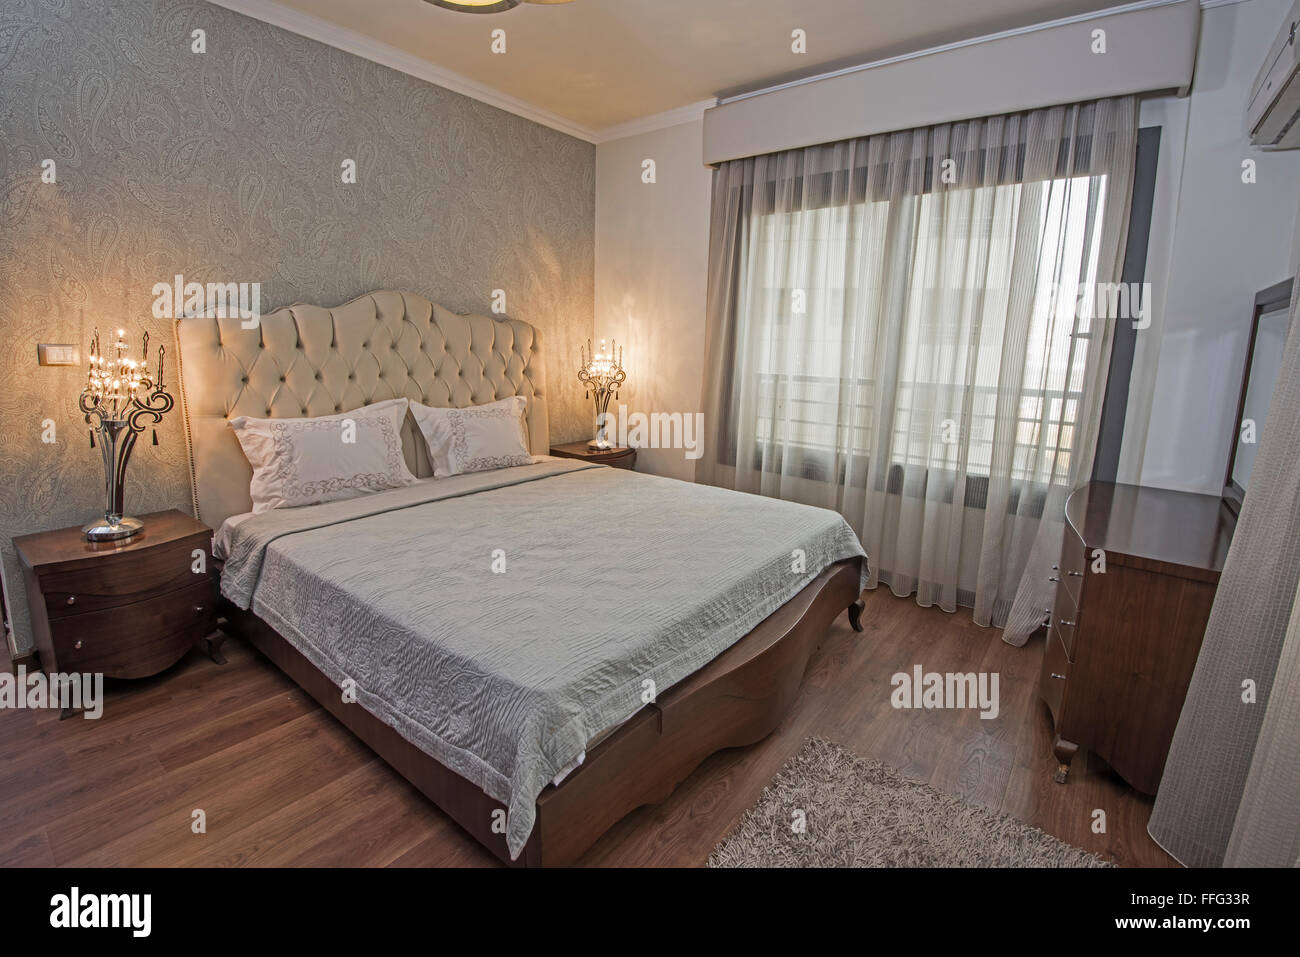 Interior design of a luxury apartment show home bedroom Stock Photo